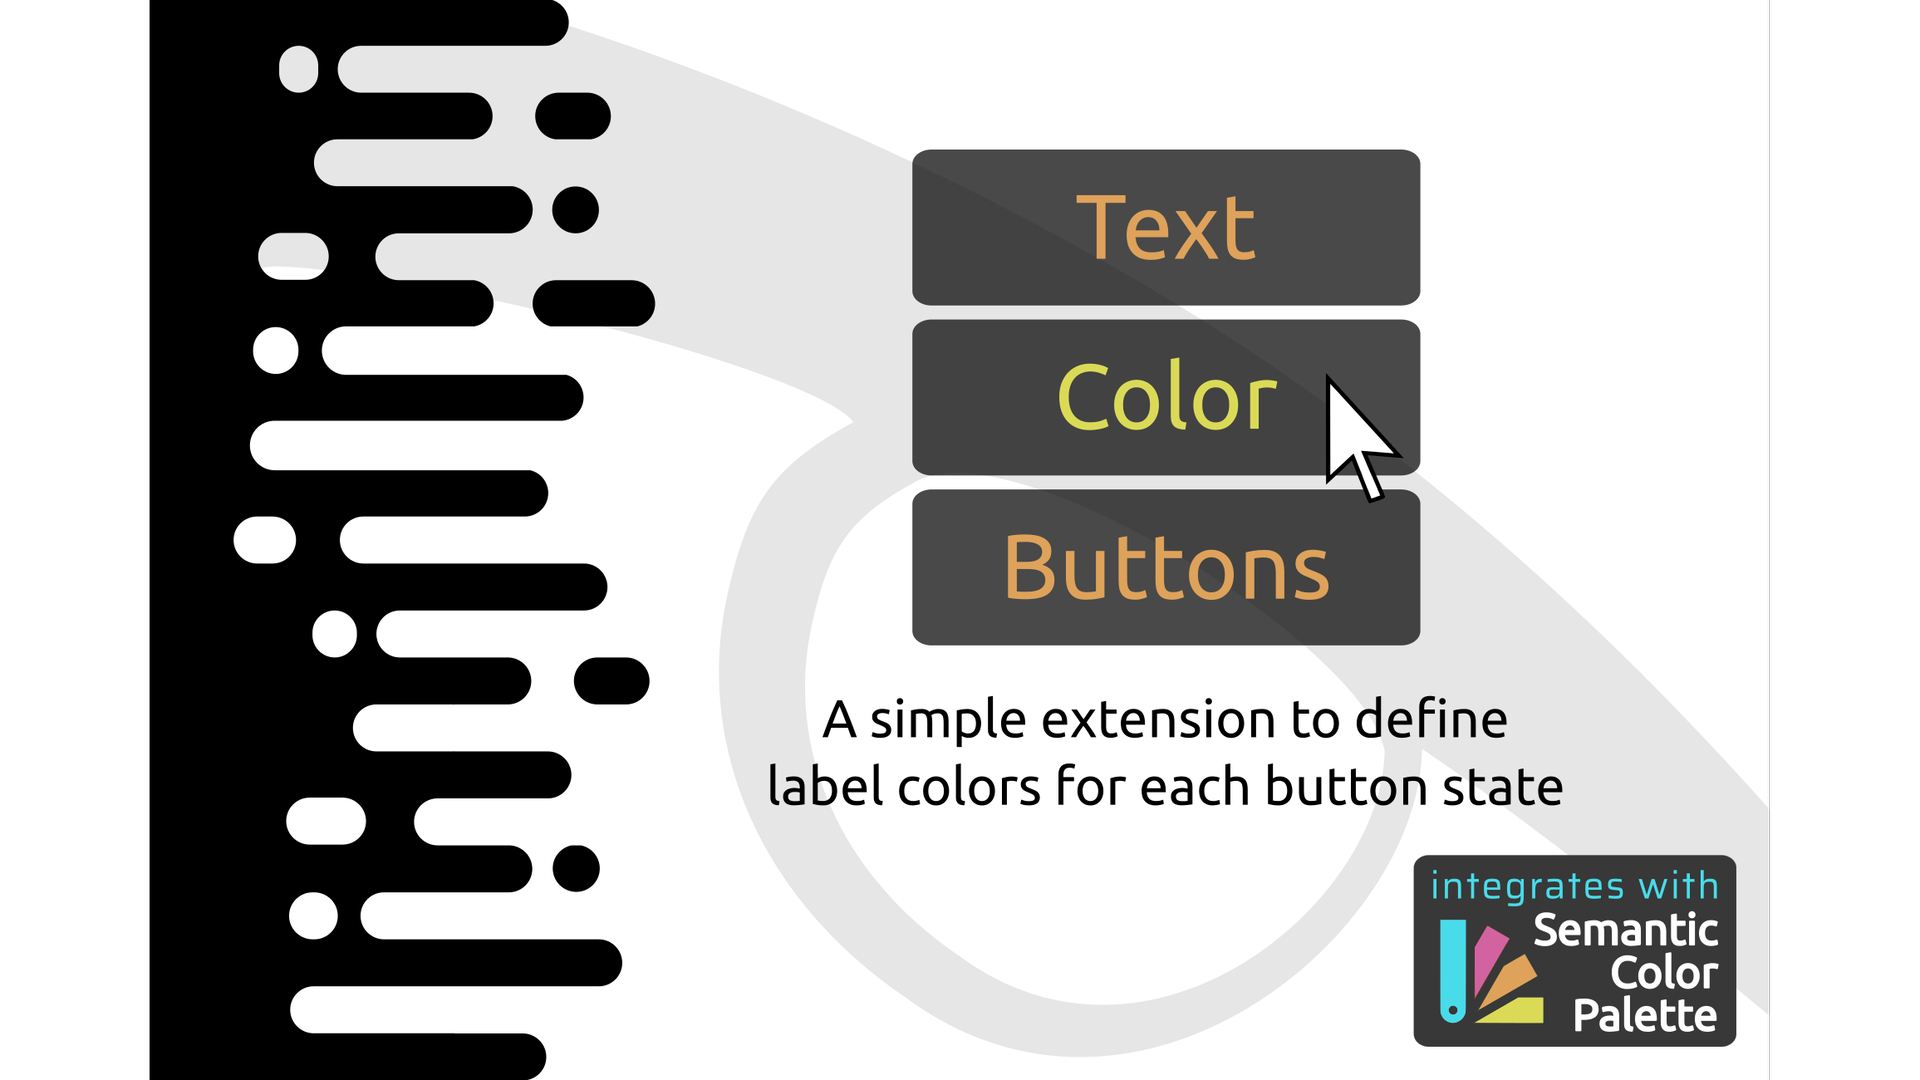 Promotional card for the "Text Color Buttons" Unity asset